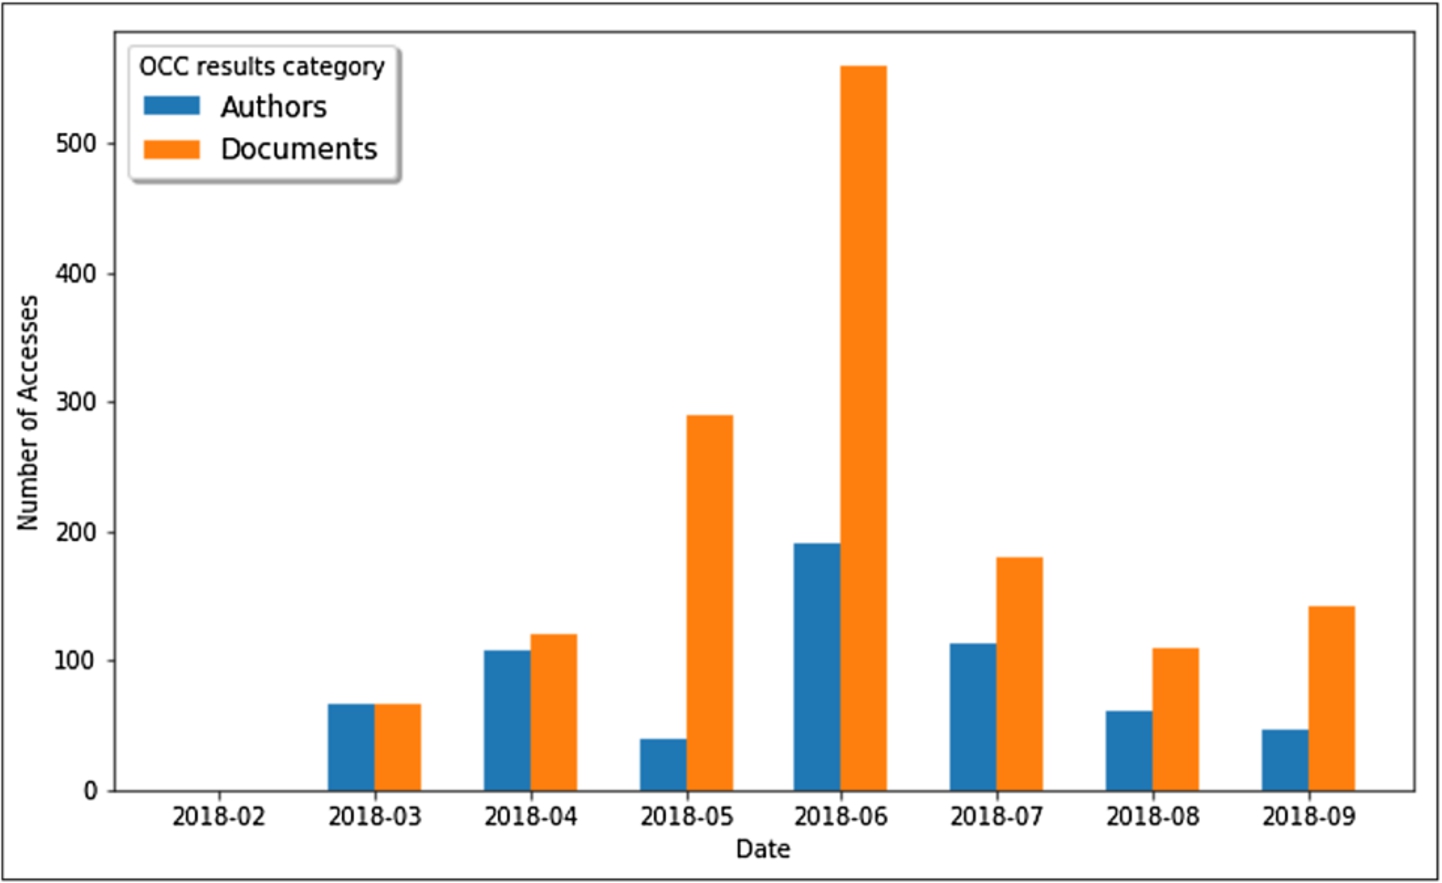 The number of queries launched through OSCAR from the OpenCitations web site, searching for author or document resources inside the OCC corpus, for each different month starting from February 2018 to September 2018.